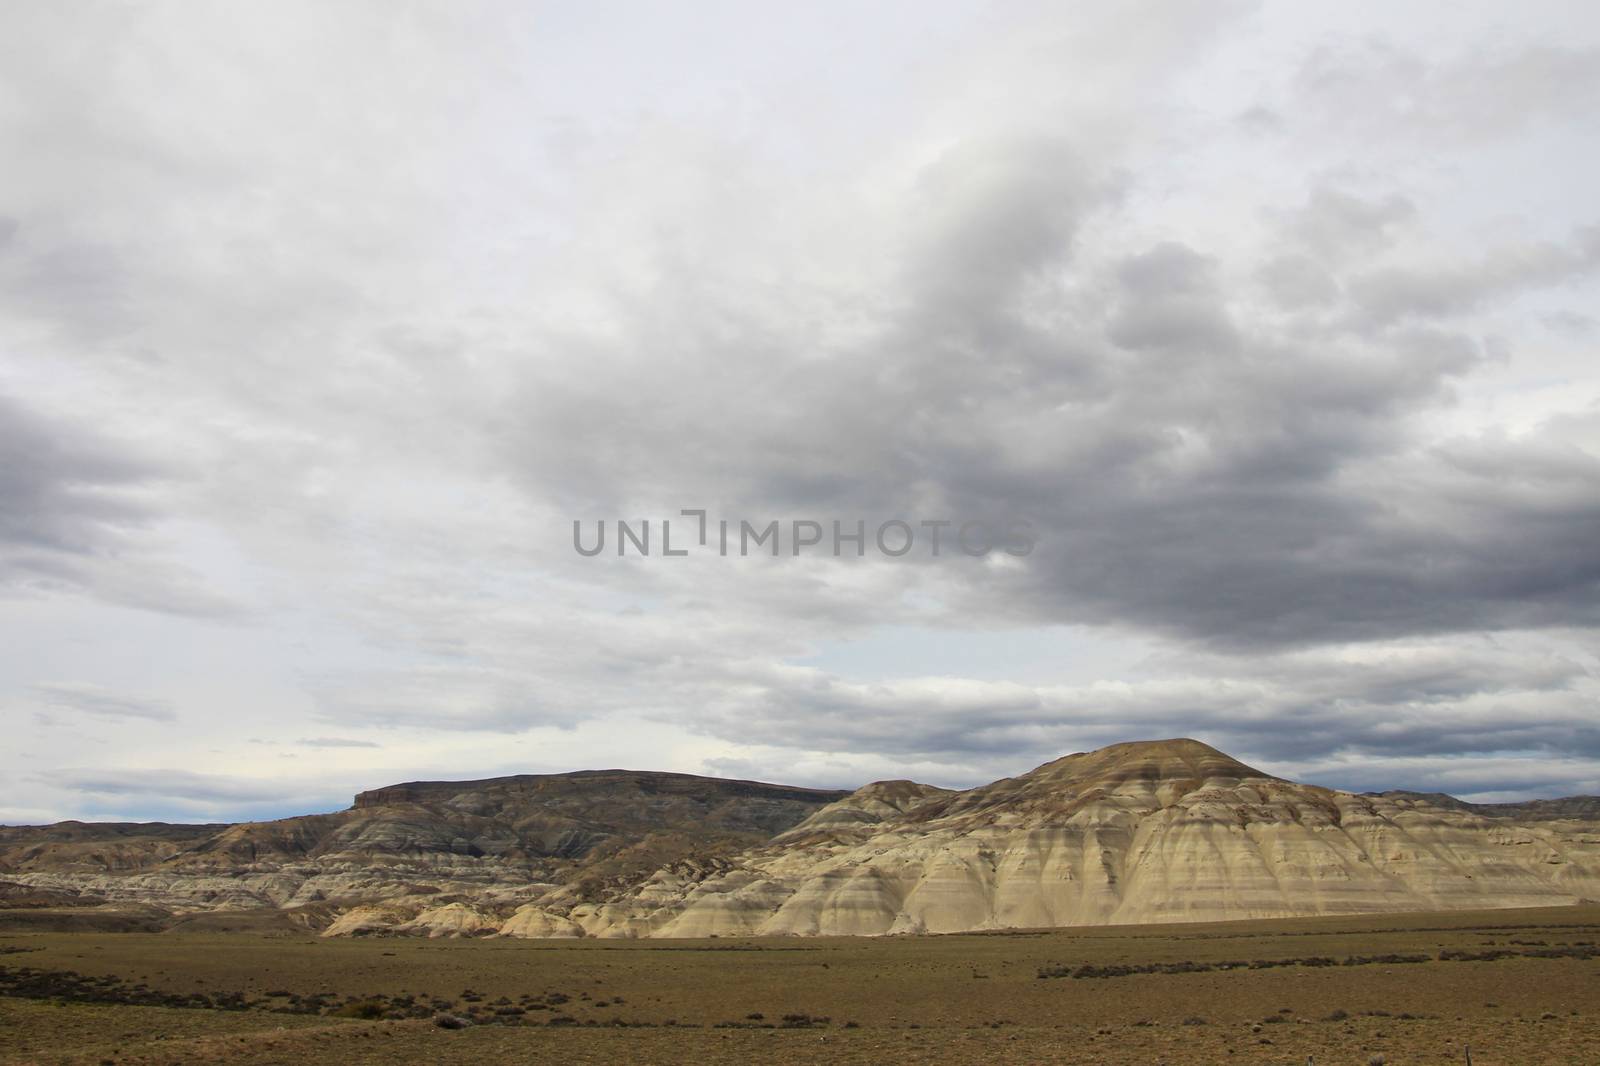 Eroded mountain landscape along ruta 40, Patagonia, Argentina by cicloco